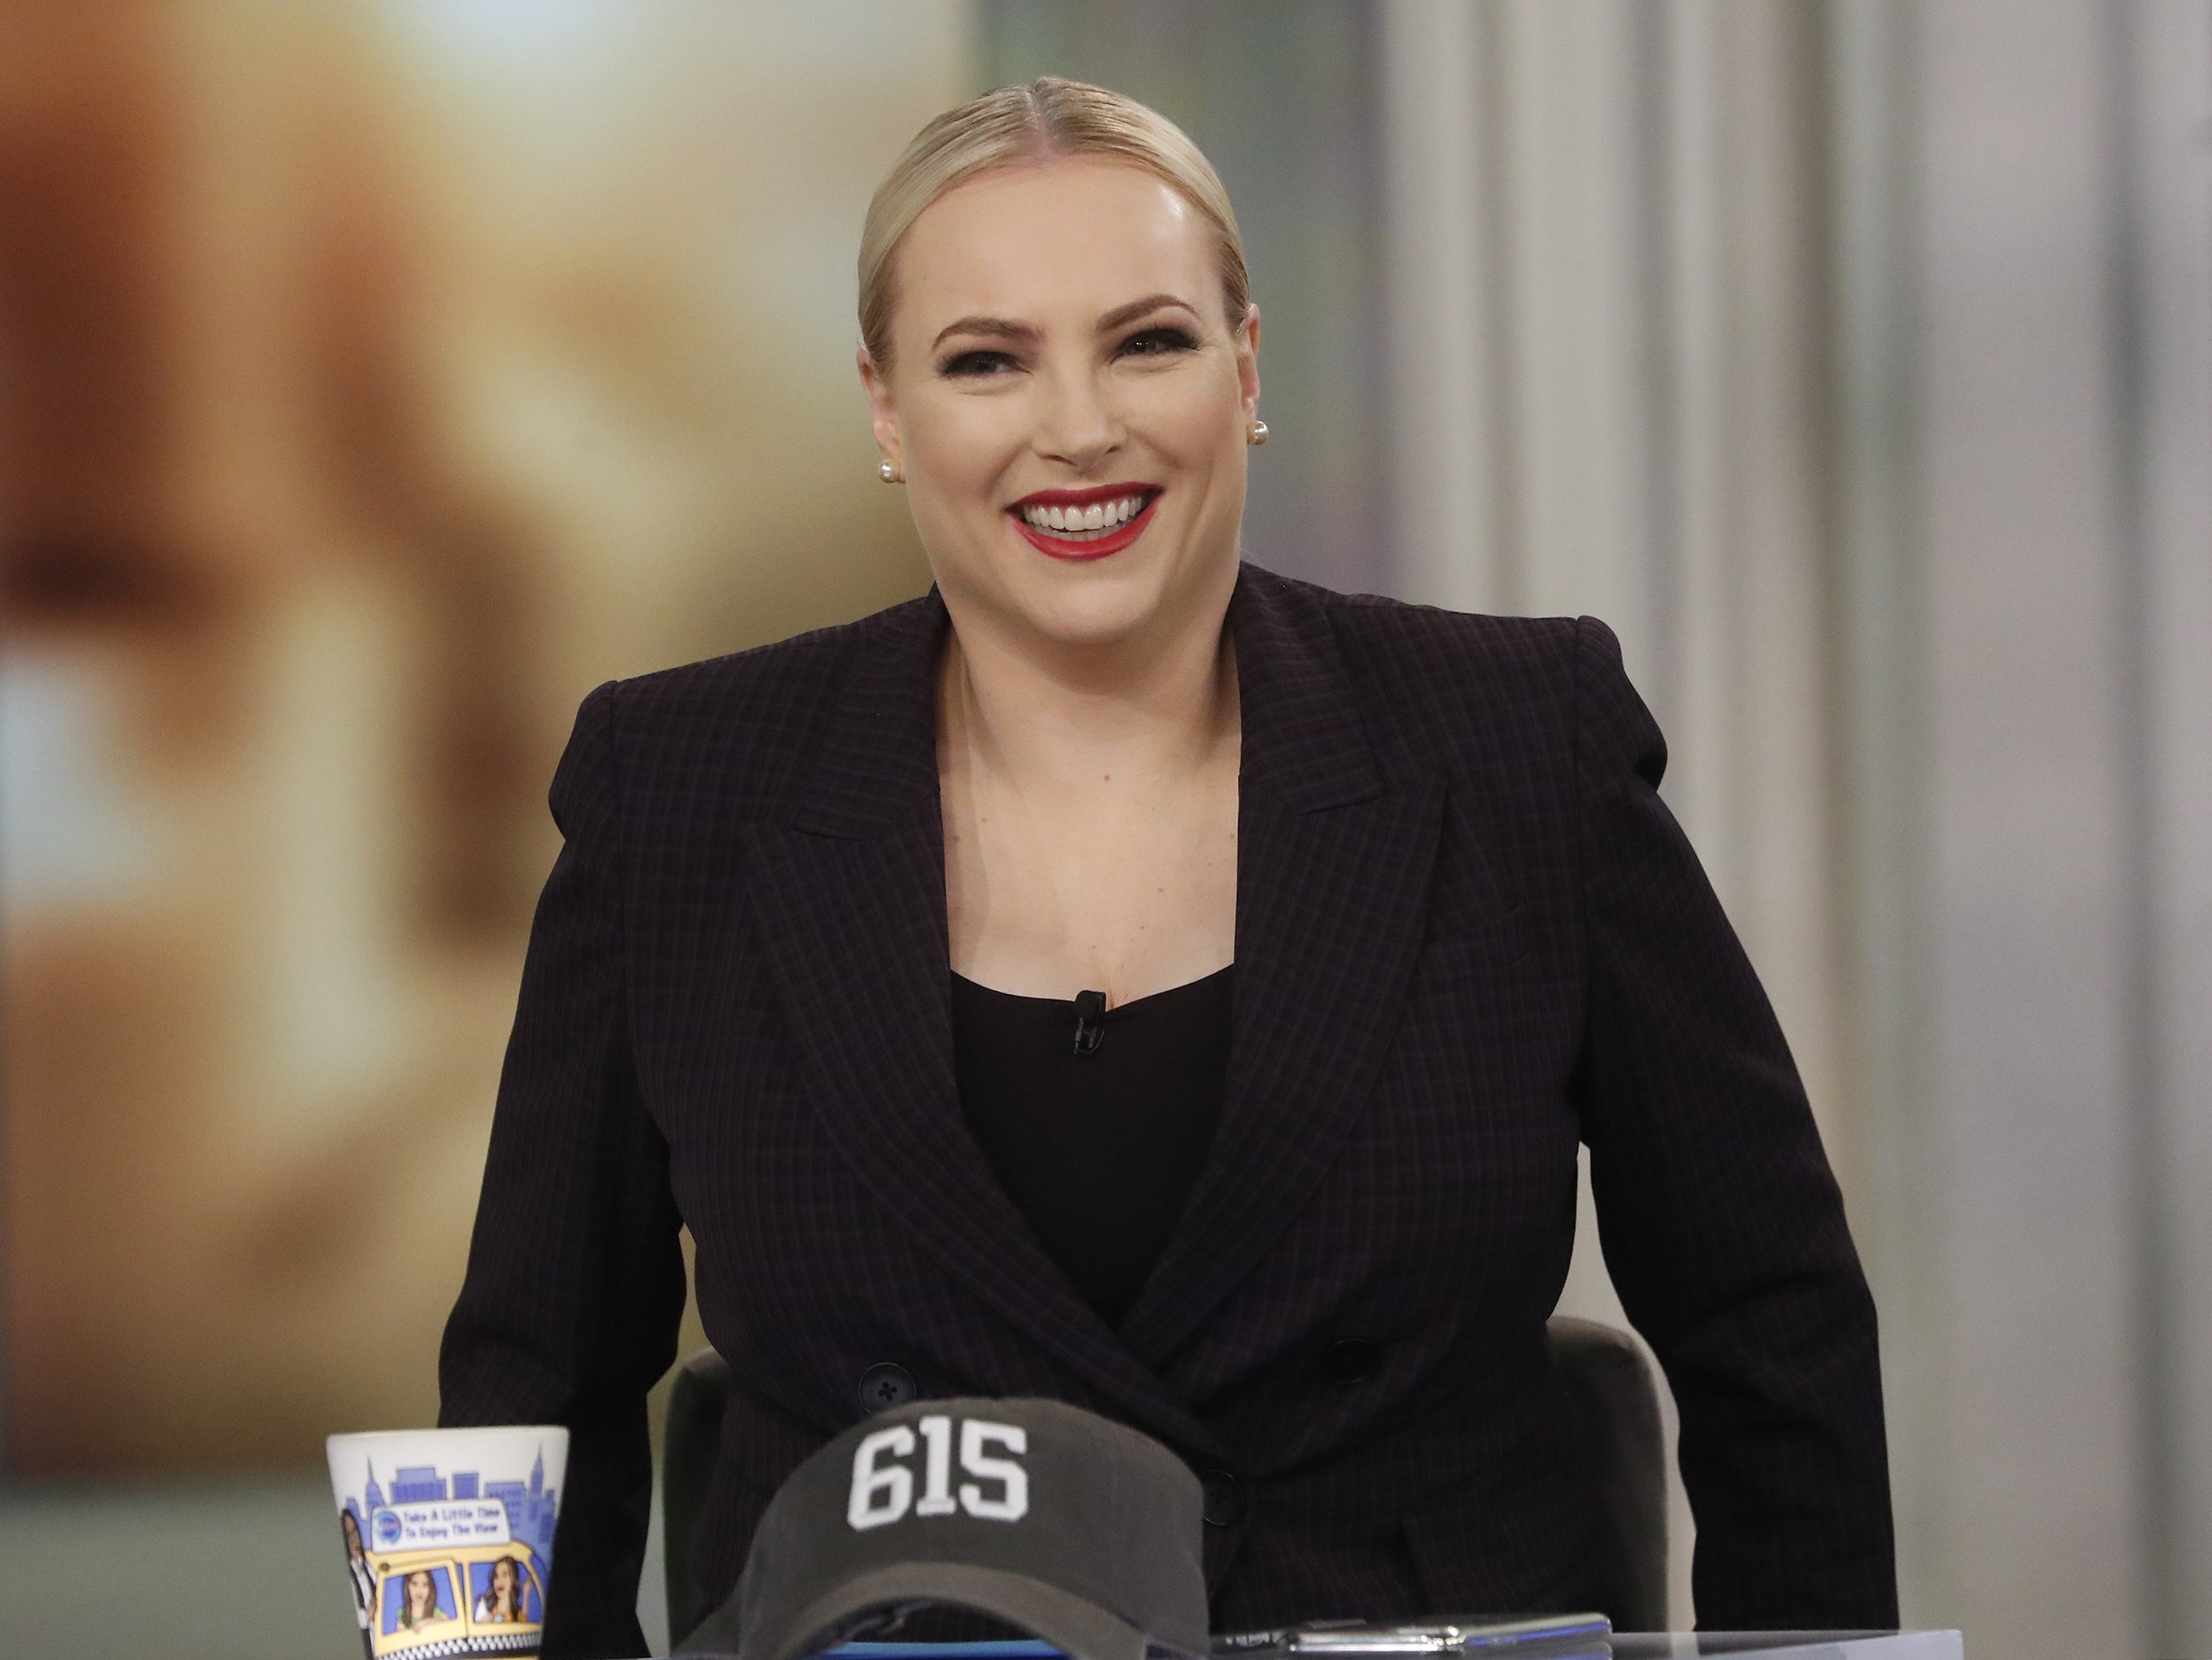 Meghan McCain appears on an episode of "The View" on Wednesday, March 11, 2020. | Photo: Getty Images